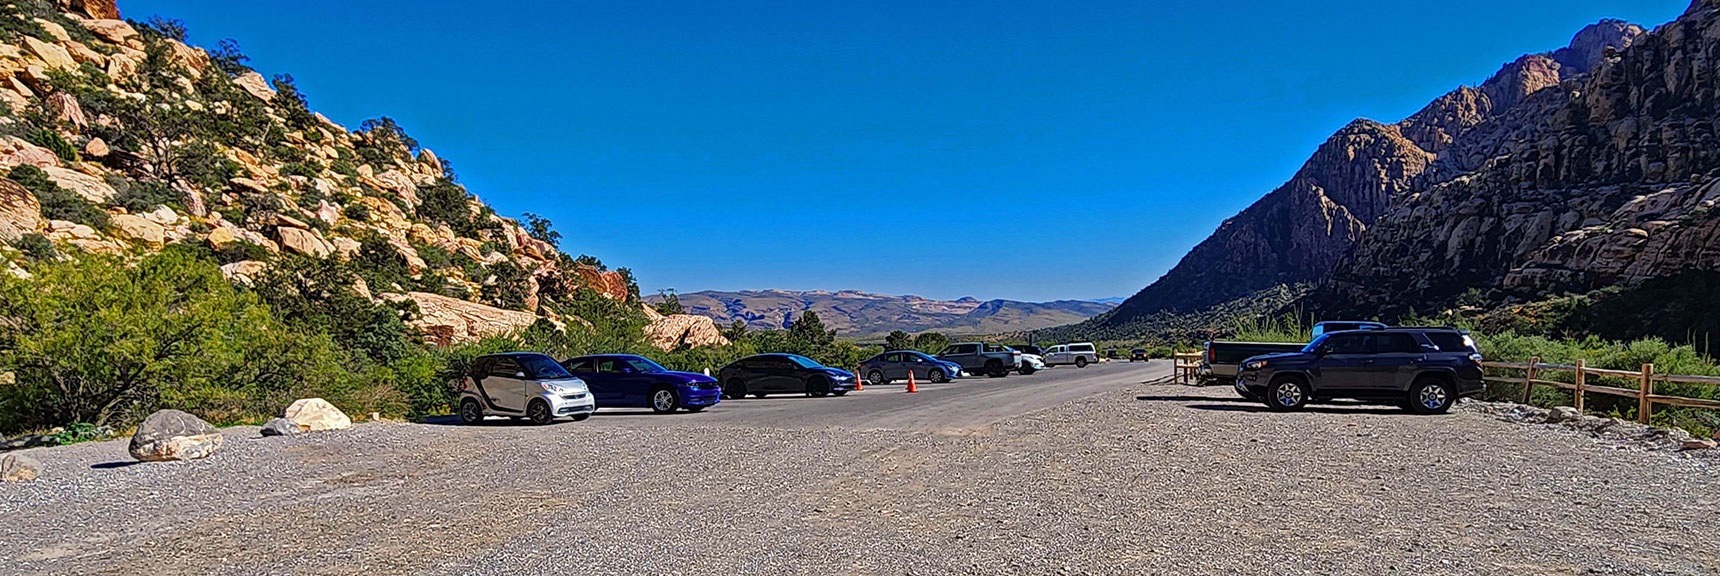 Return to Willow Spring Picnic Area Parking. "The Beast" on Left. | Switchback Spring Ridge | Red Rock Canyon, Nevada